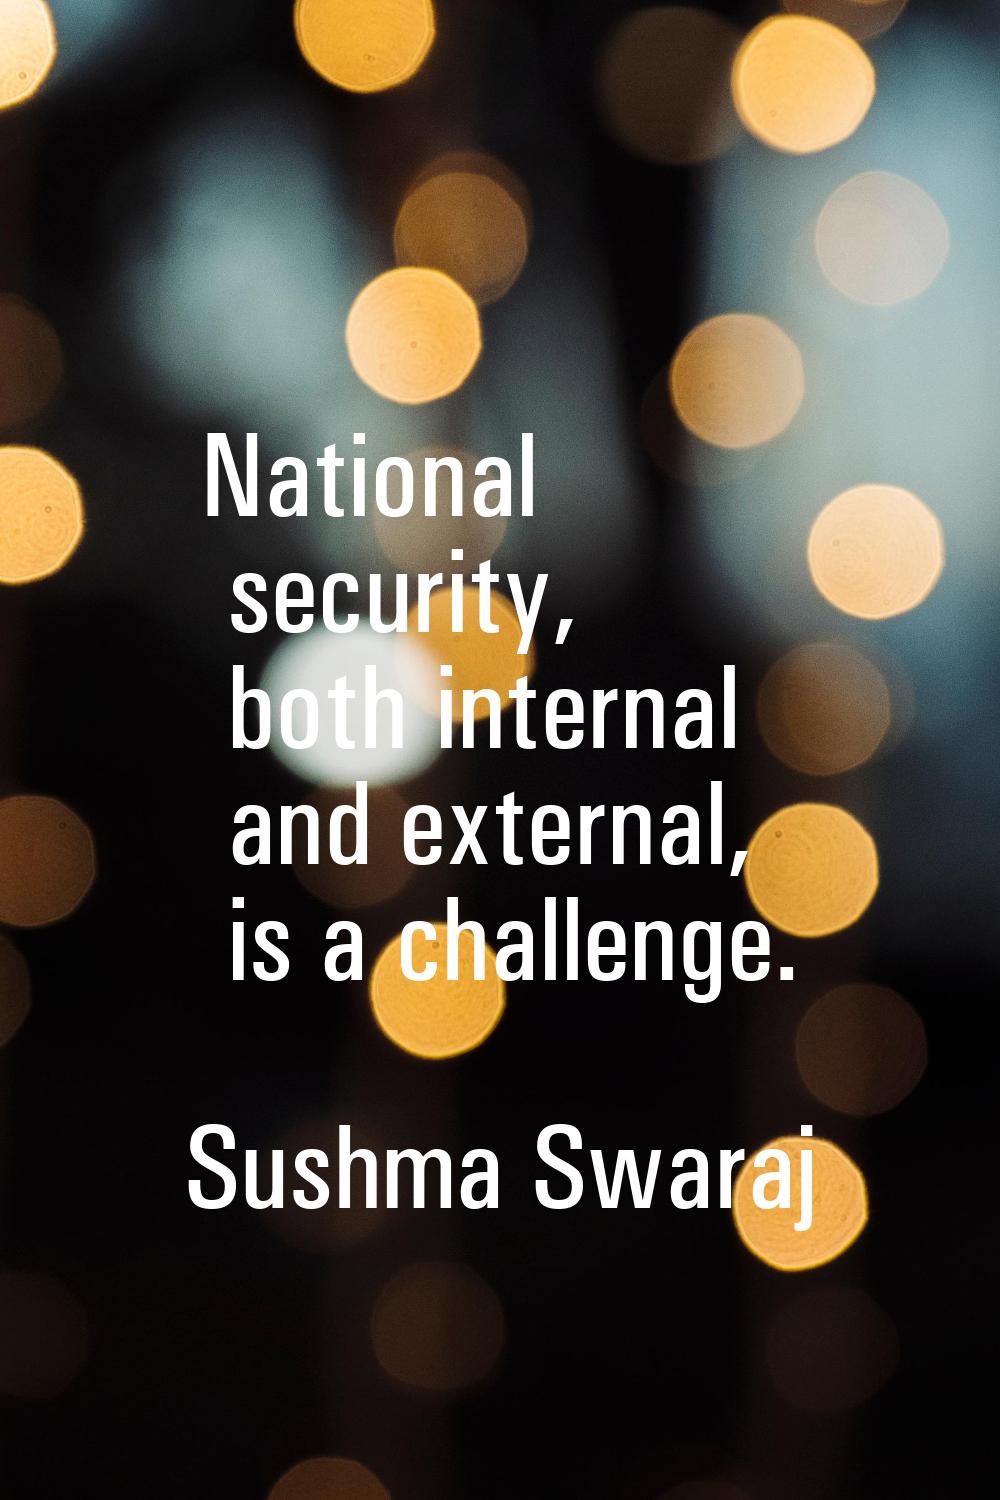 National security, both internal and external, is a challenge.